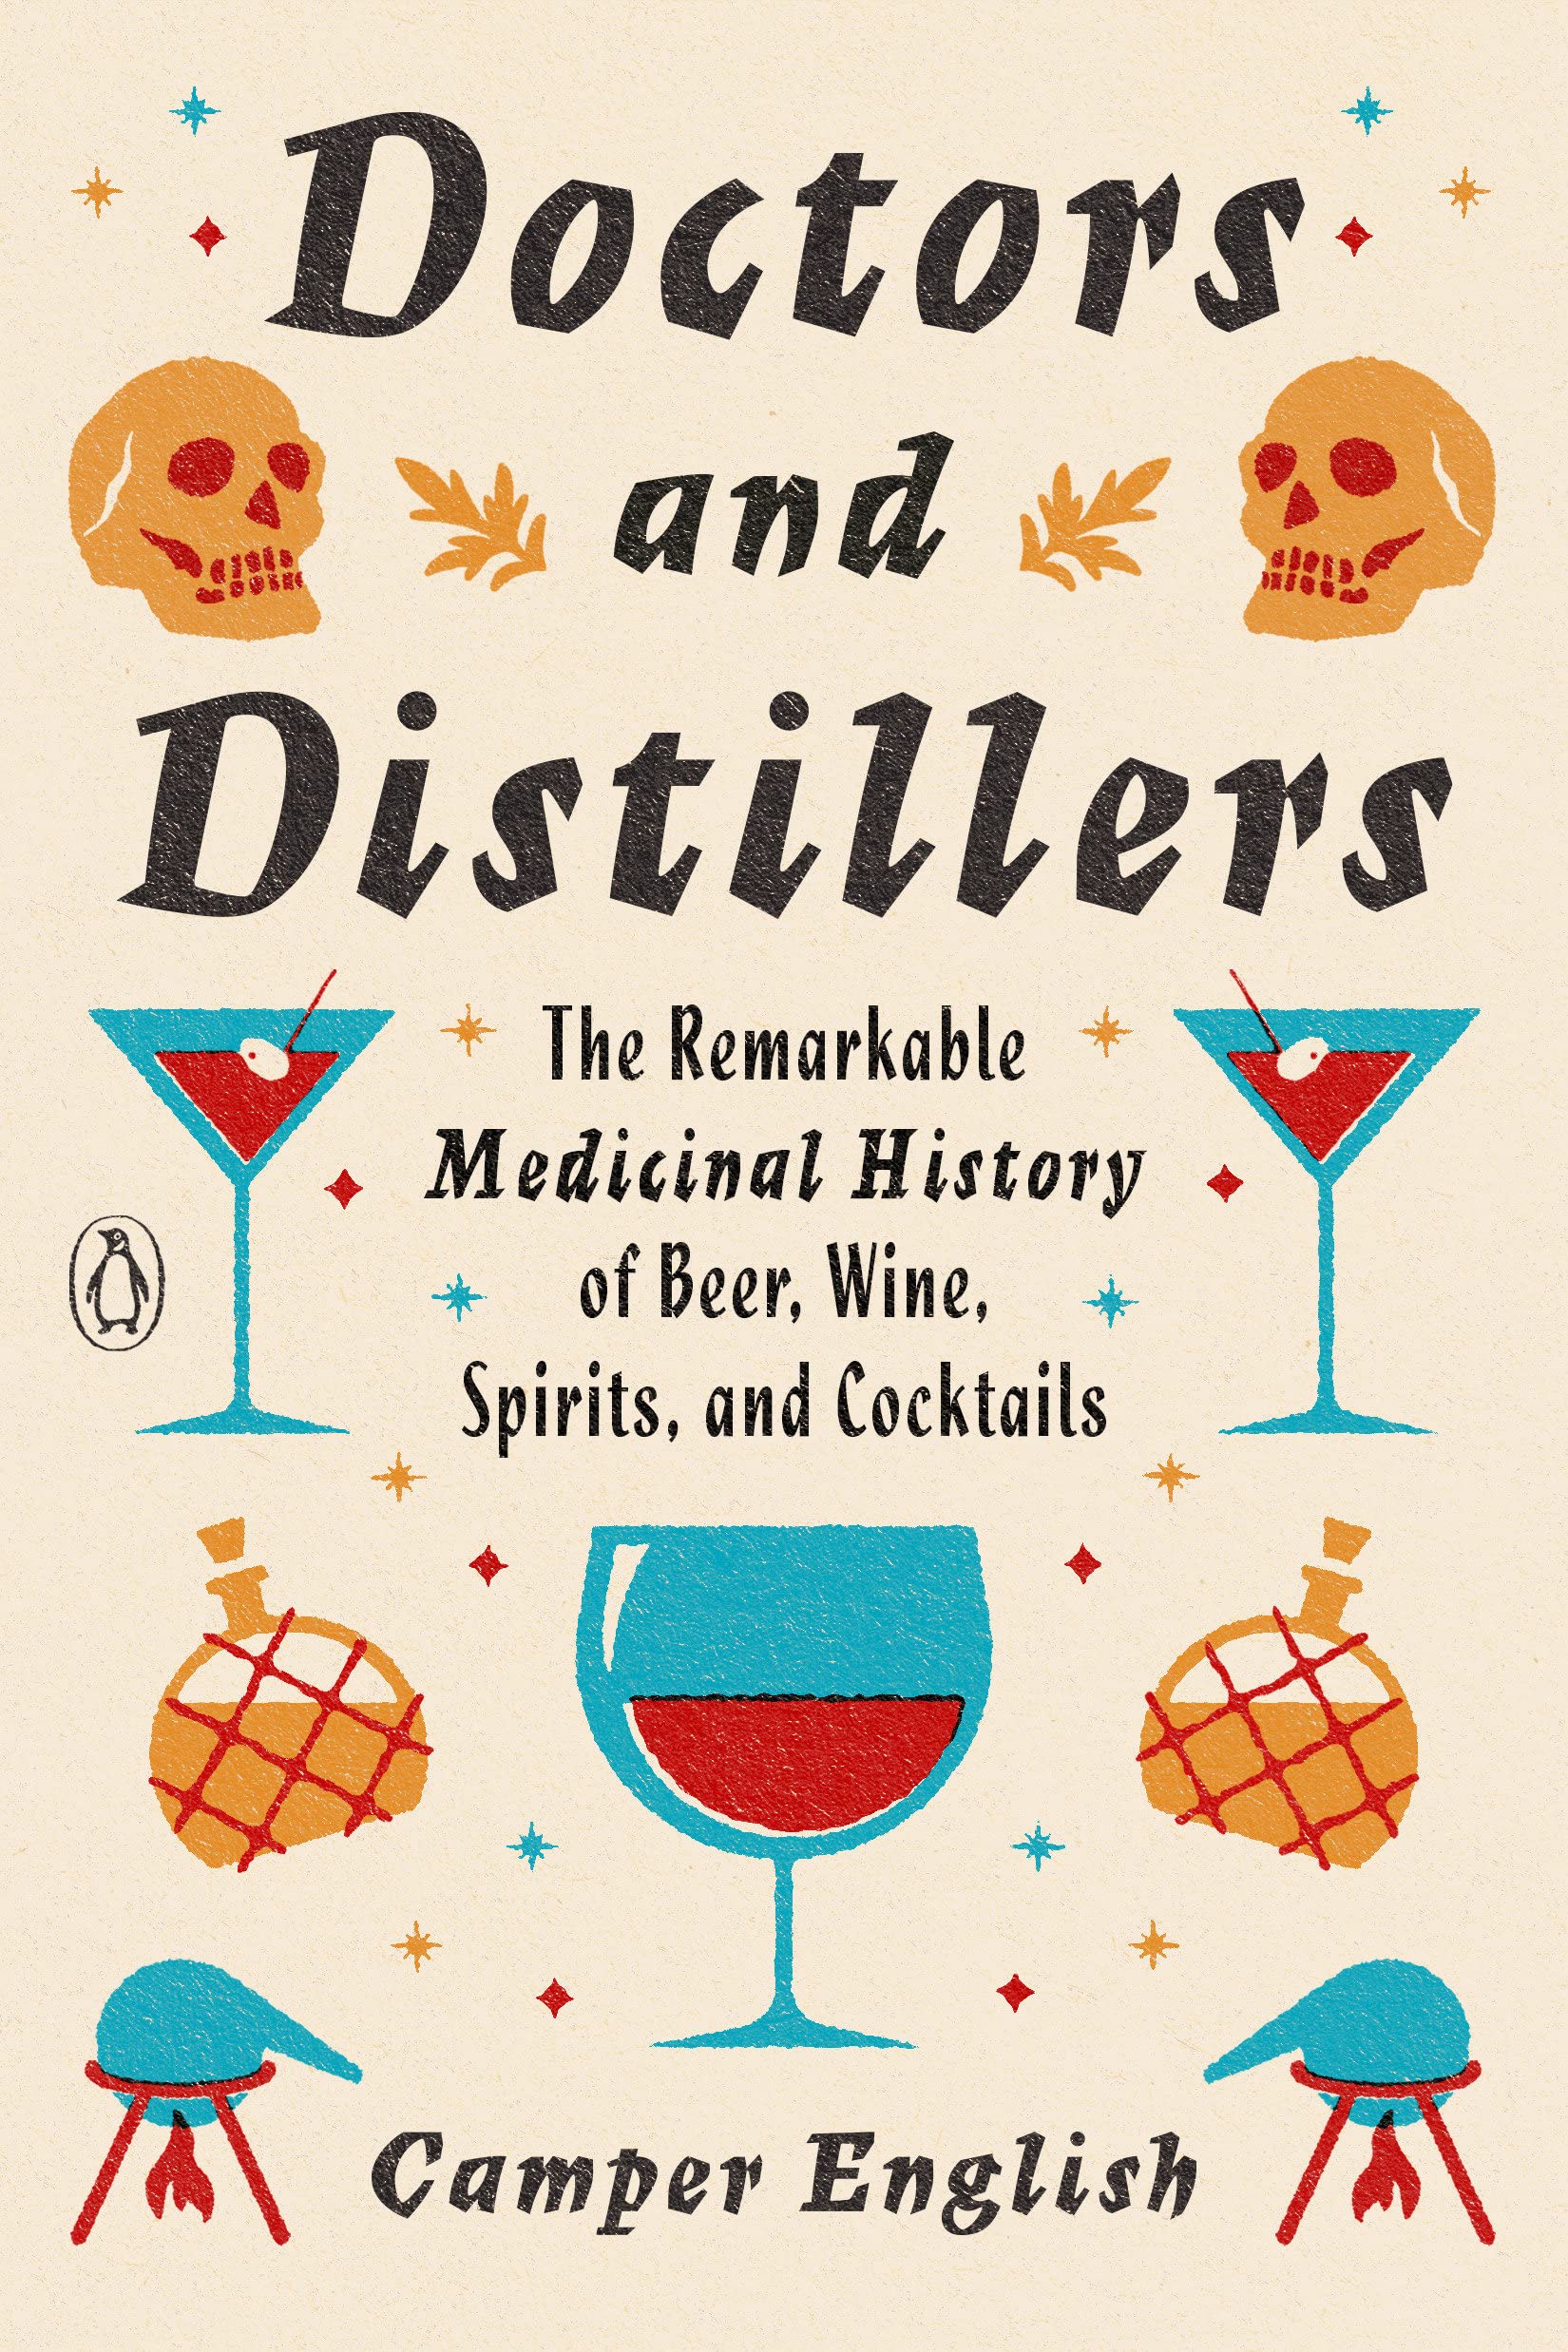 Doctors and Distillers: The Remarkable Medicinal History of Beer, Wine, Spirits, and Cocktails (Camper English)